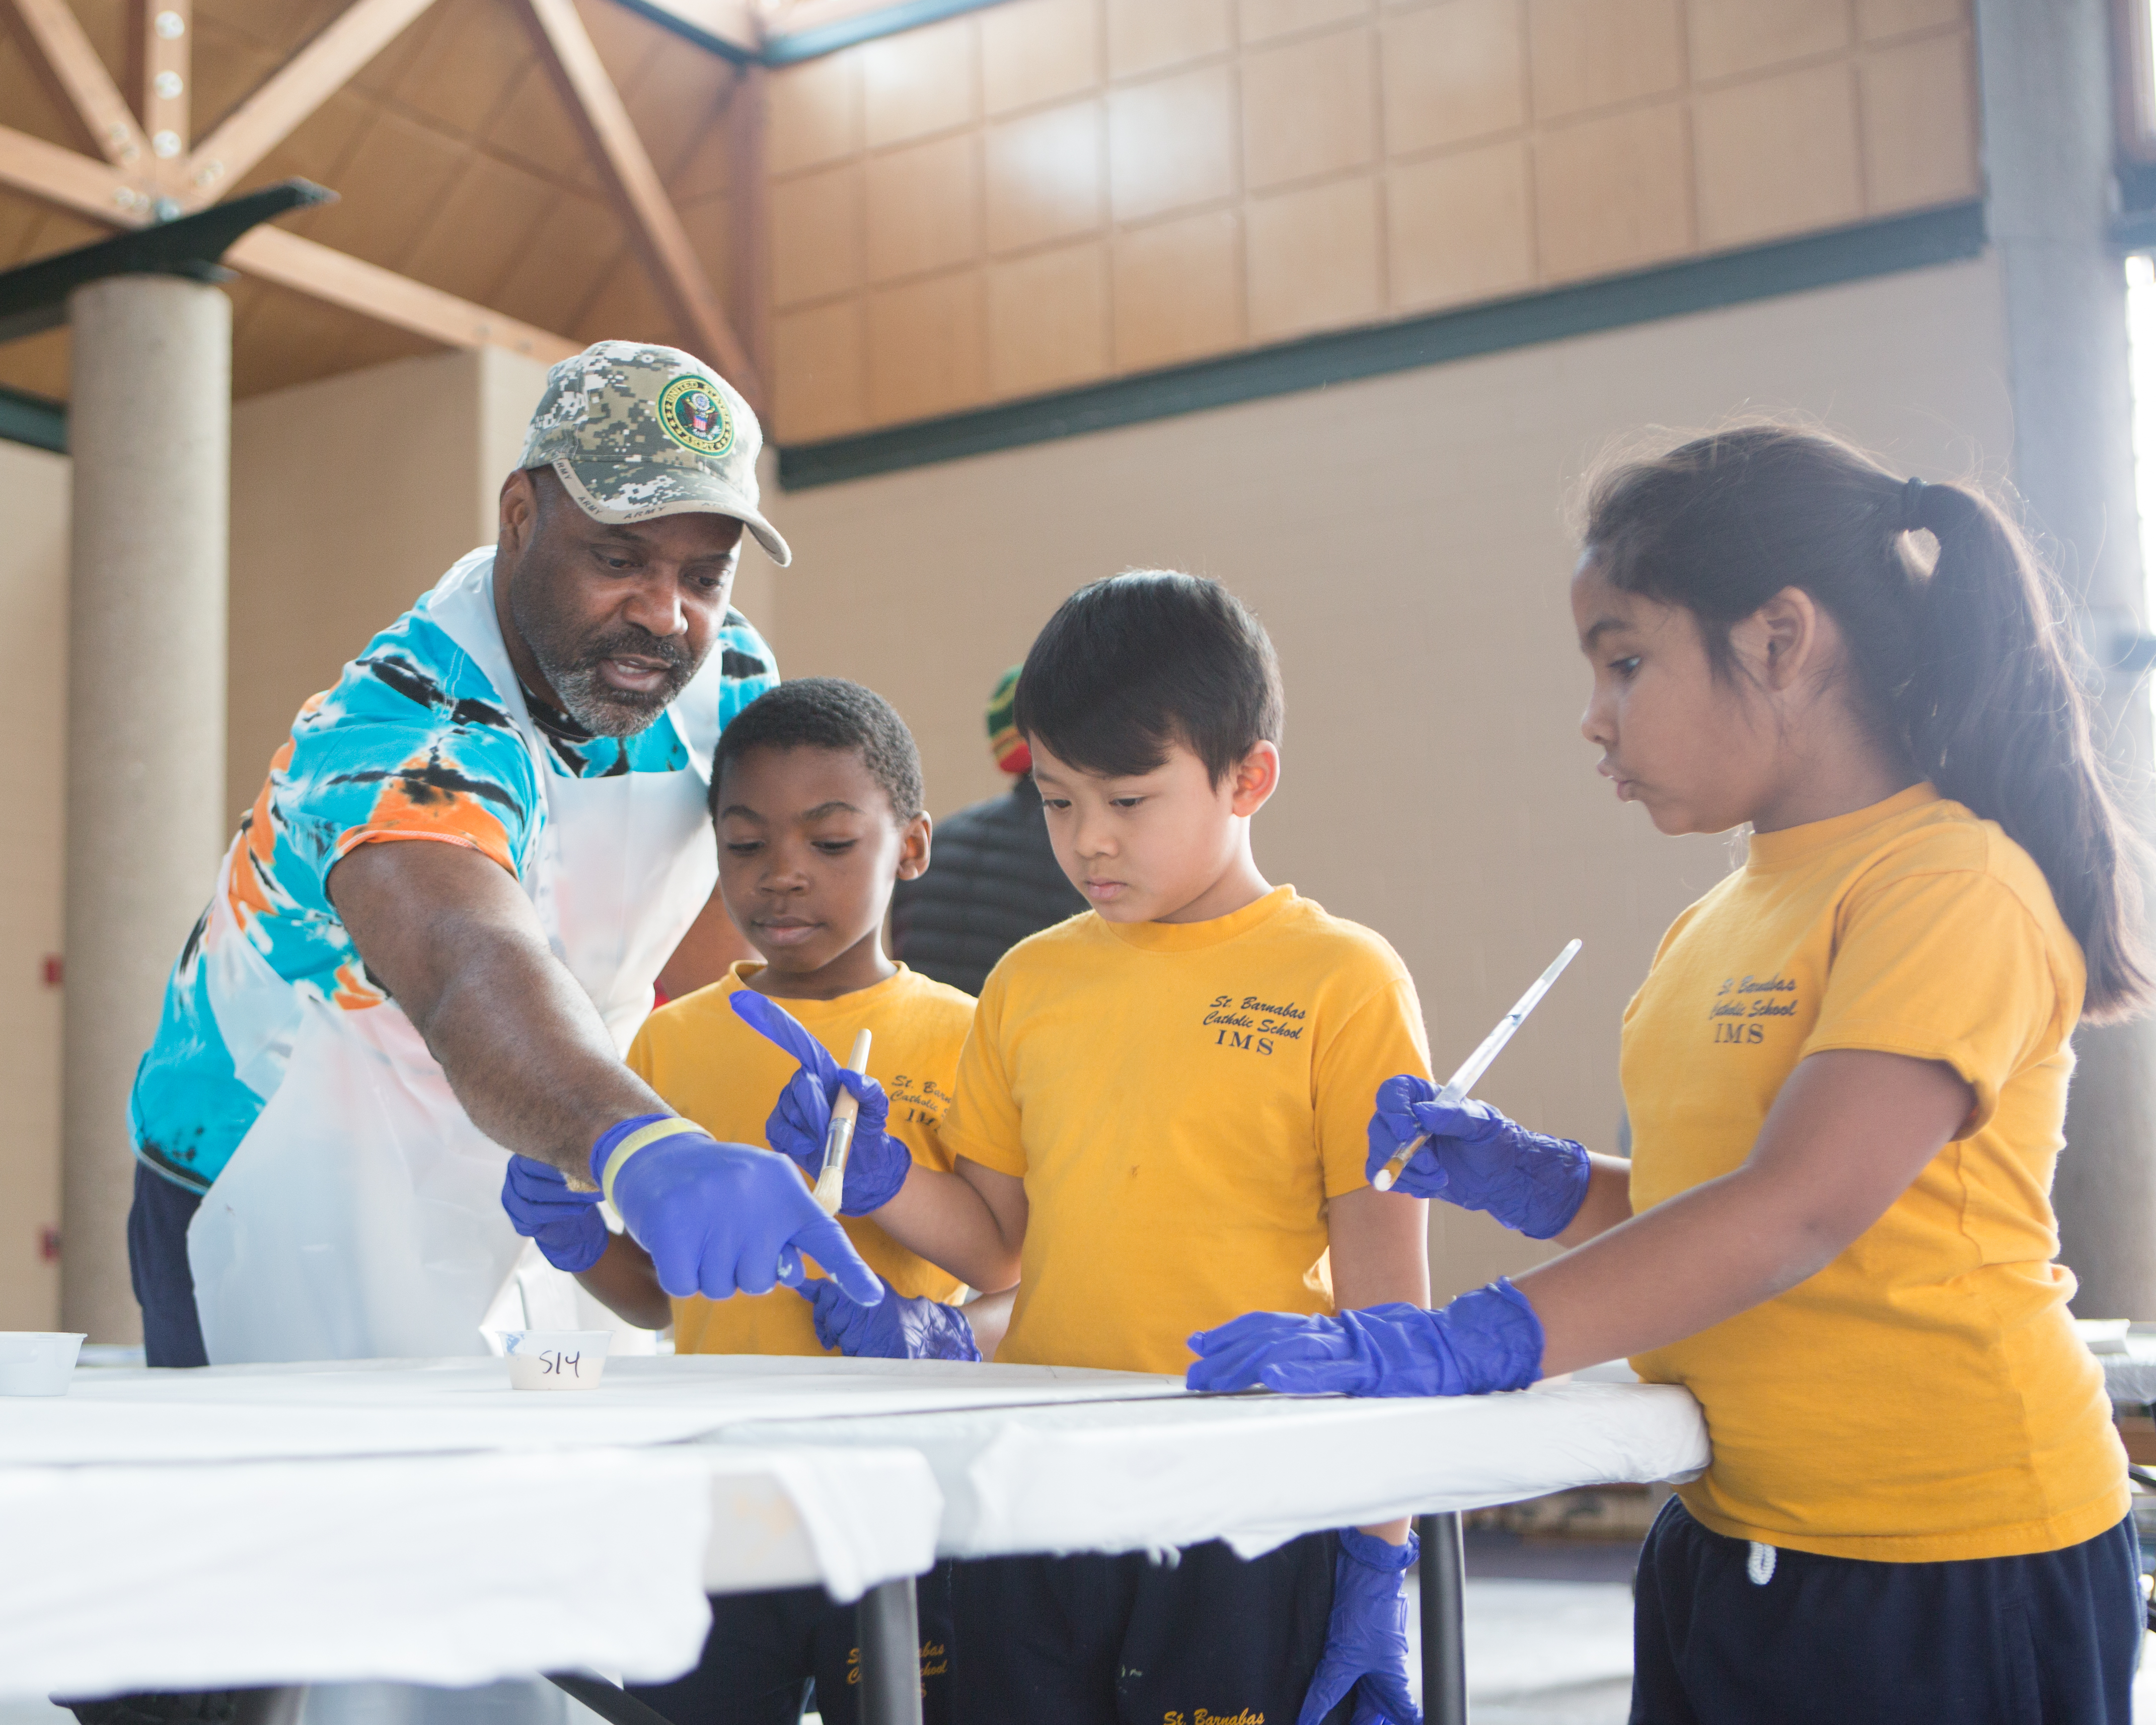 A man helps young children complete a group painting